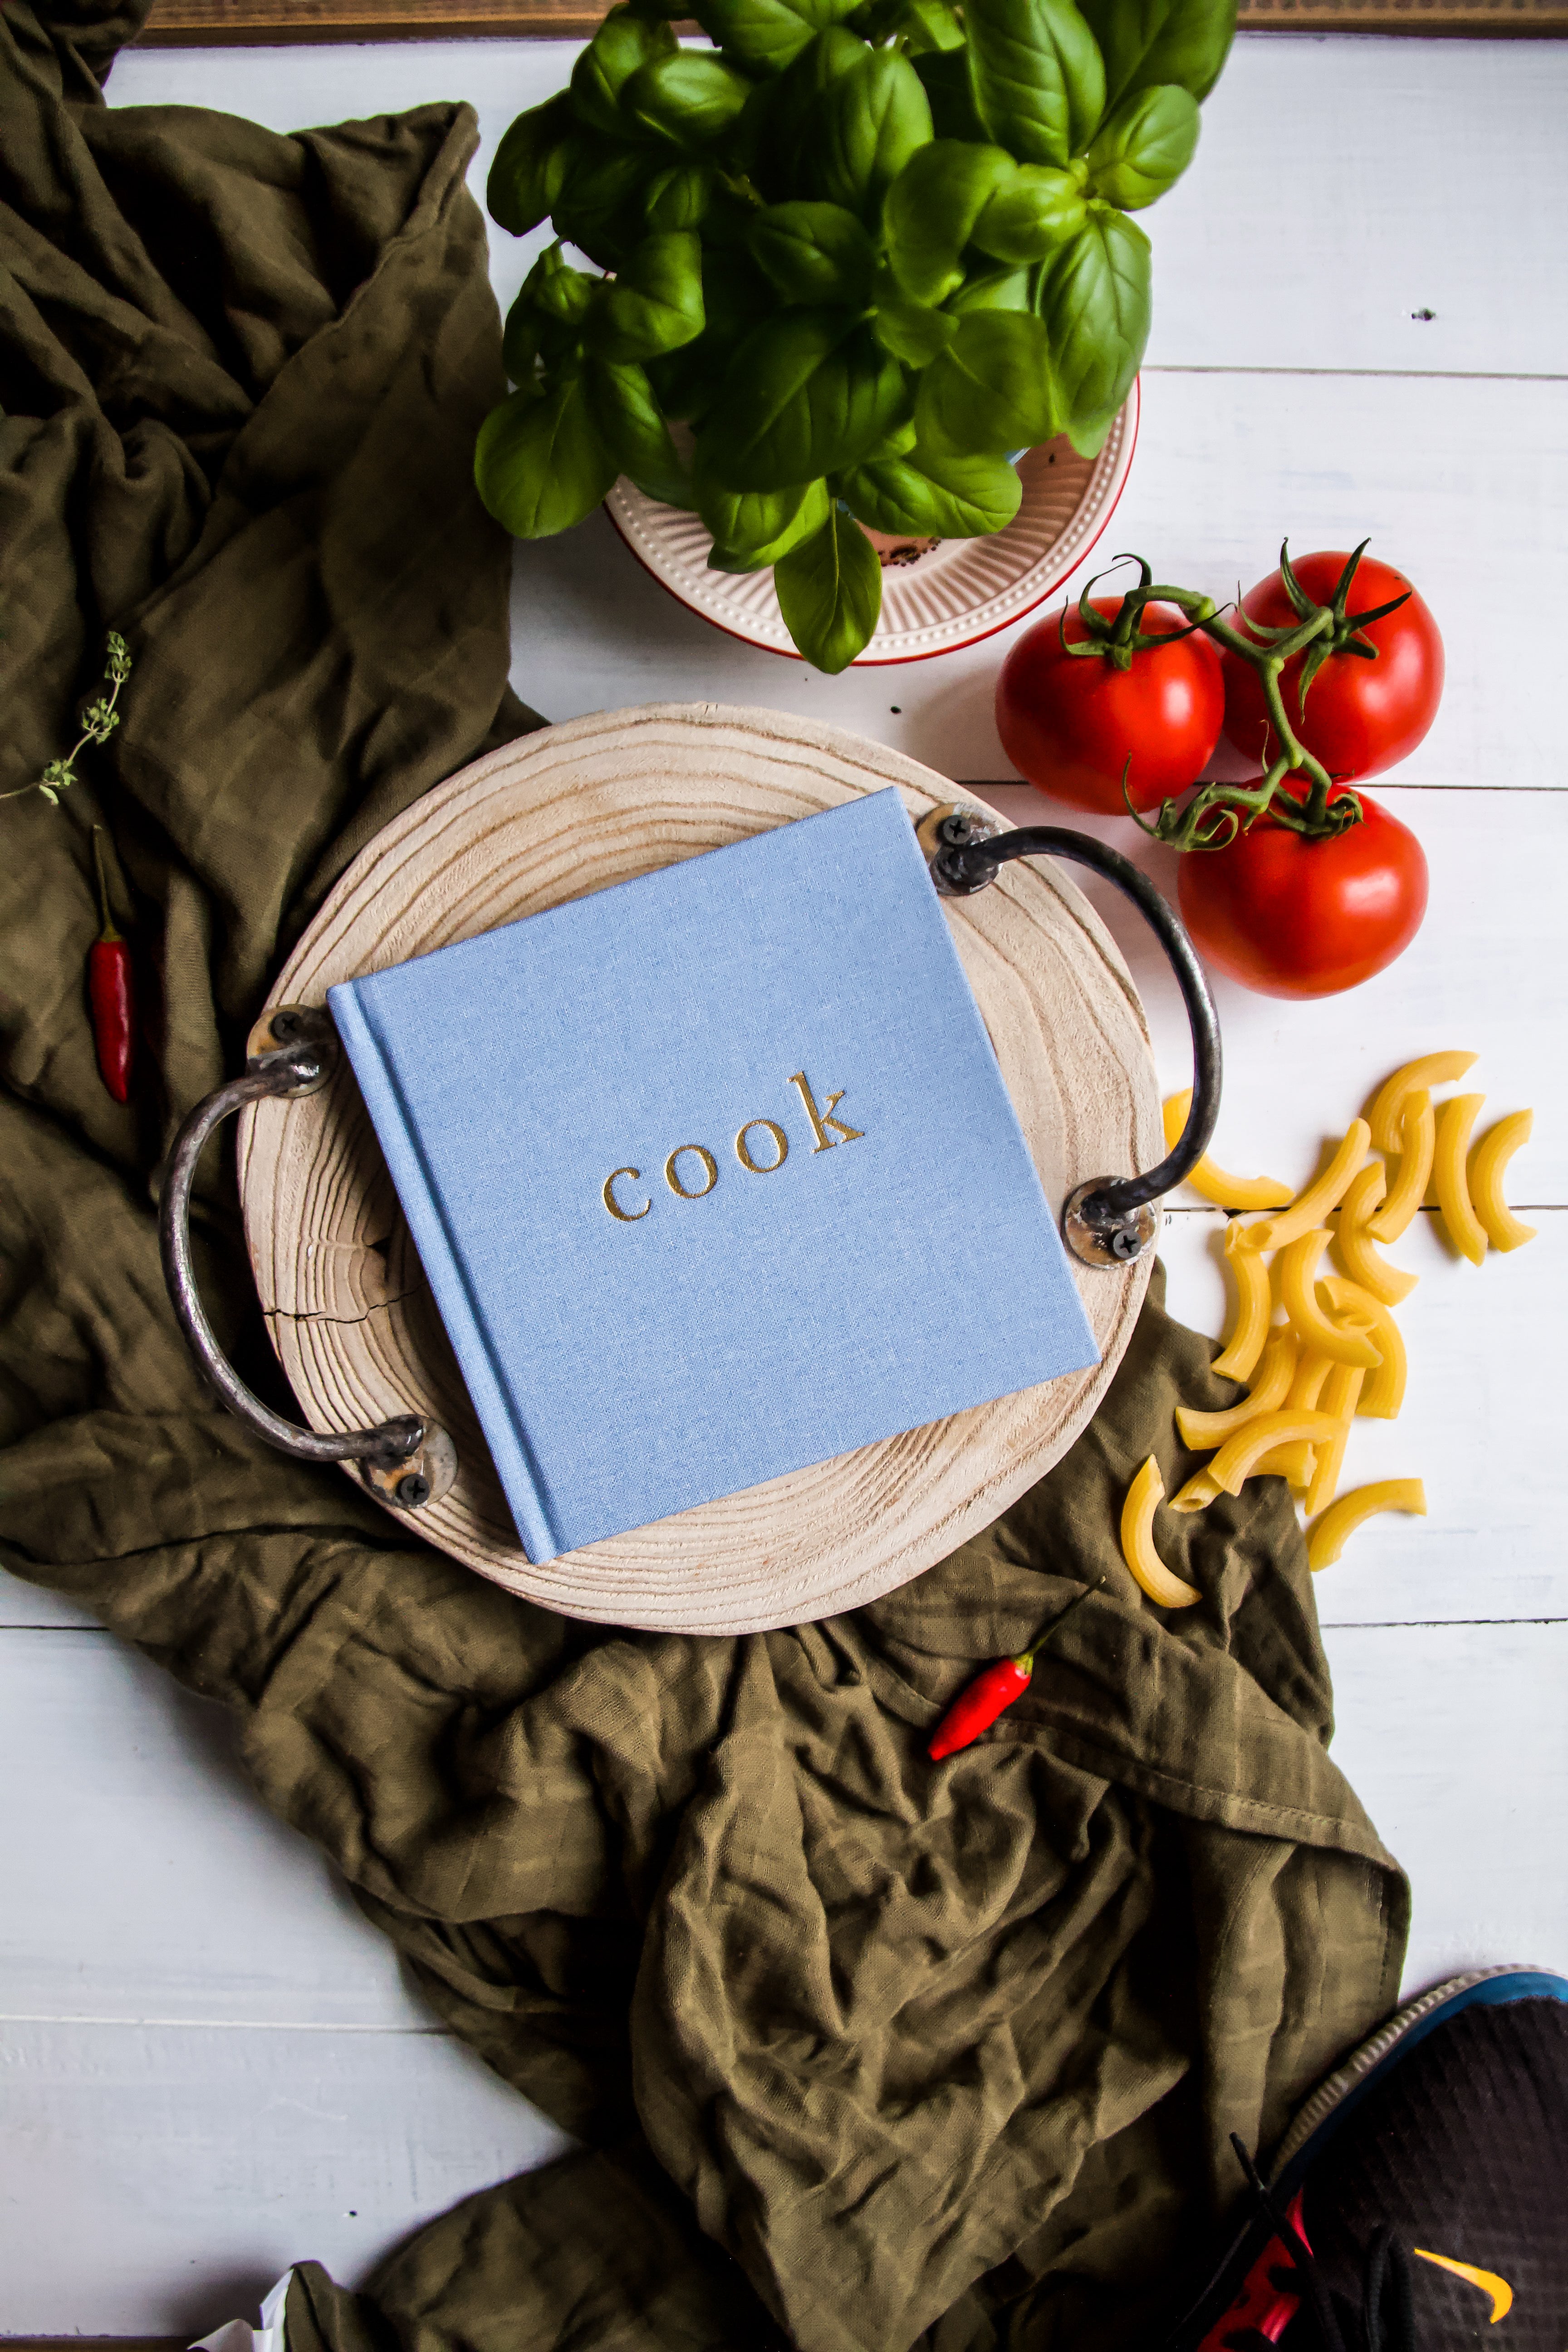 Write to Me | Cook. Recipes to Cook - Journal